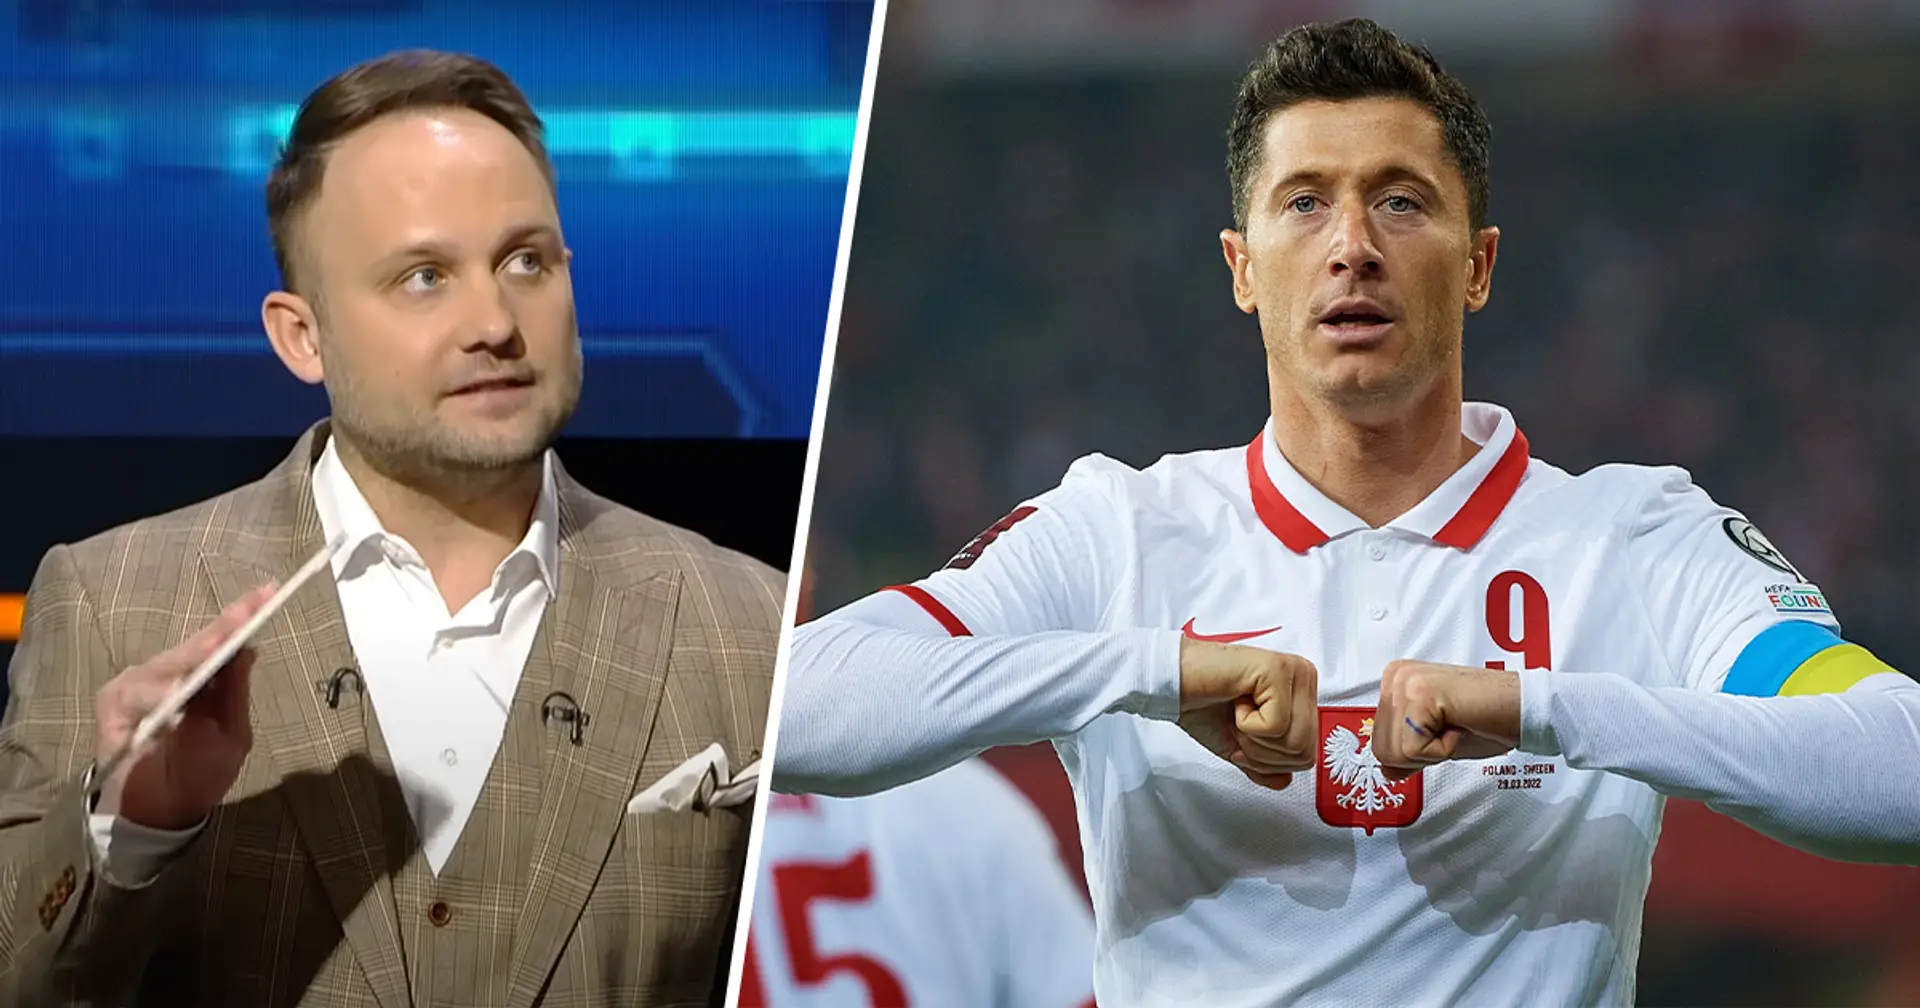 Russian sports channel TV host: 'I wish Poland and Lewandowski a huge fail at the World Cup. You're filthy creatures'